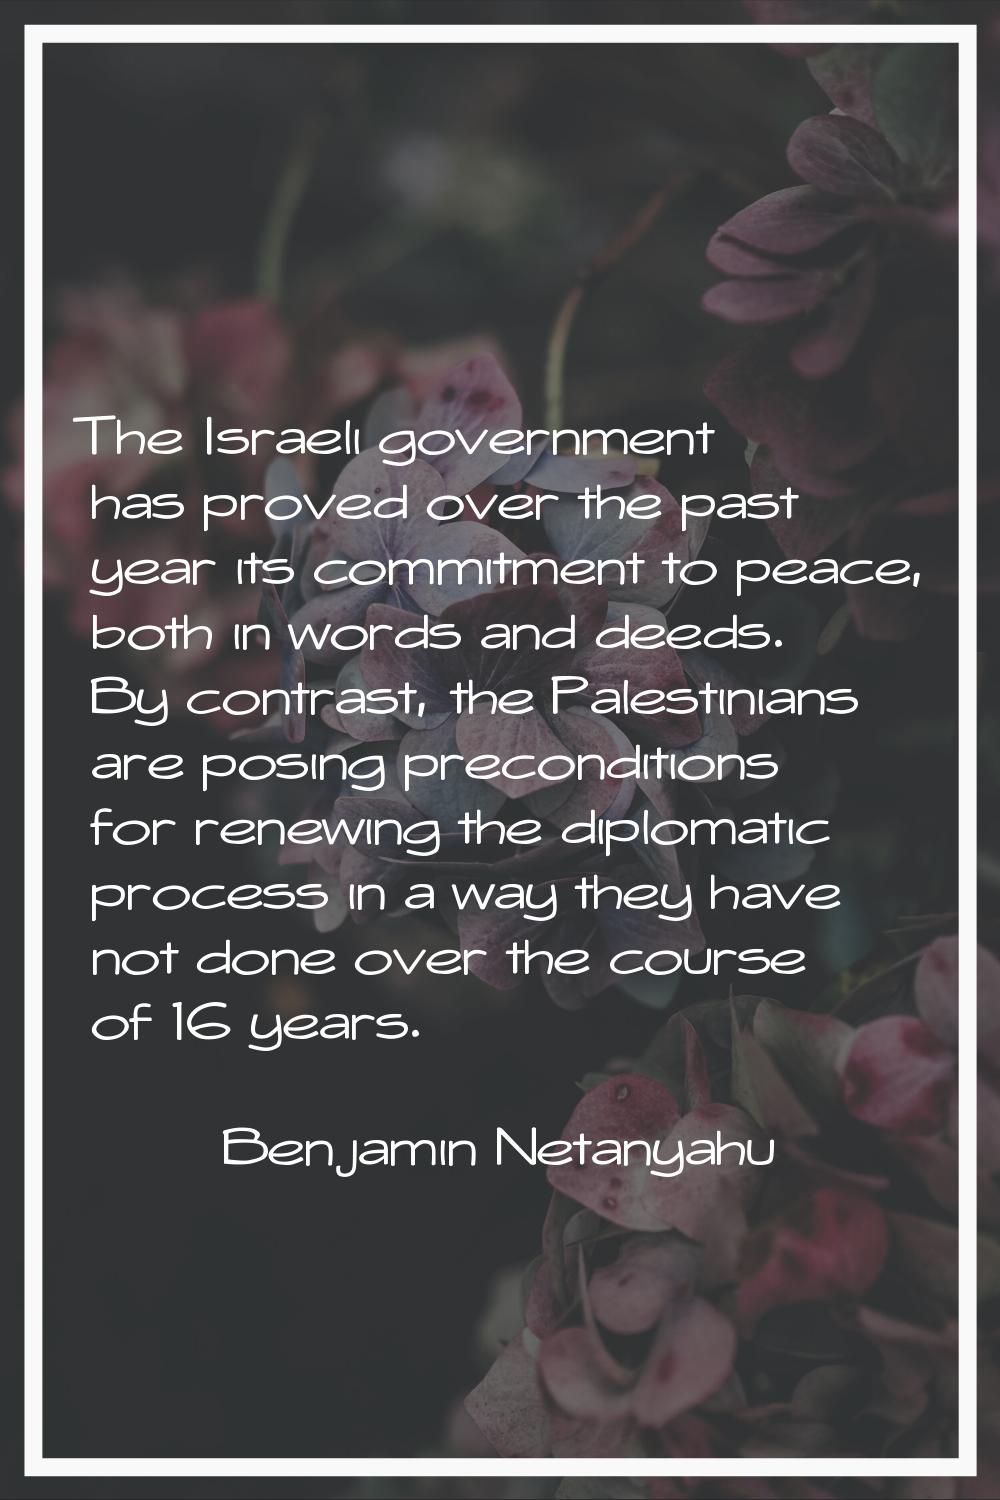 The Israeli government has proved over the past year its commitment to peace, both in words and dee